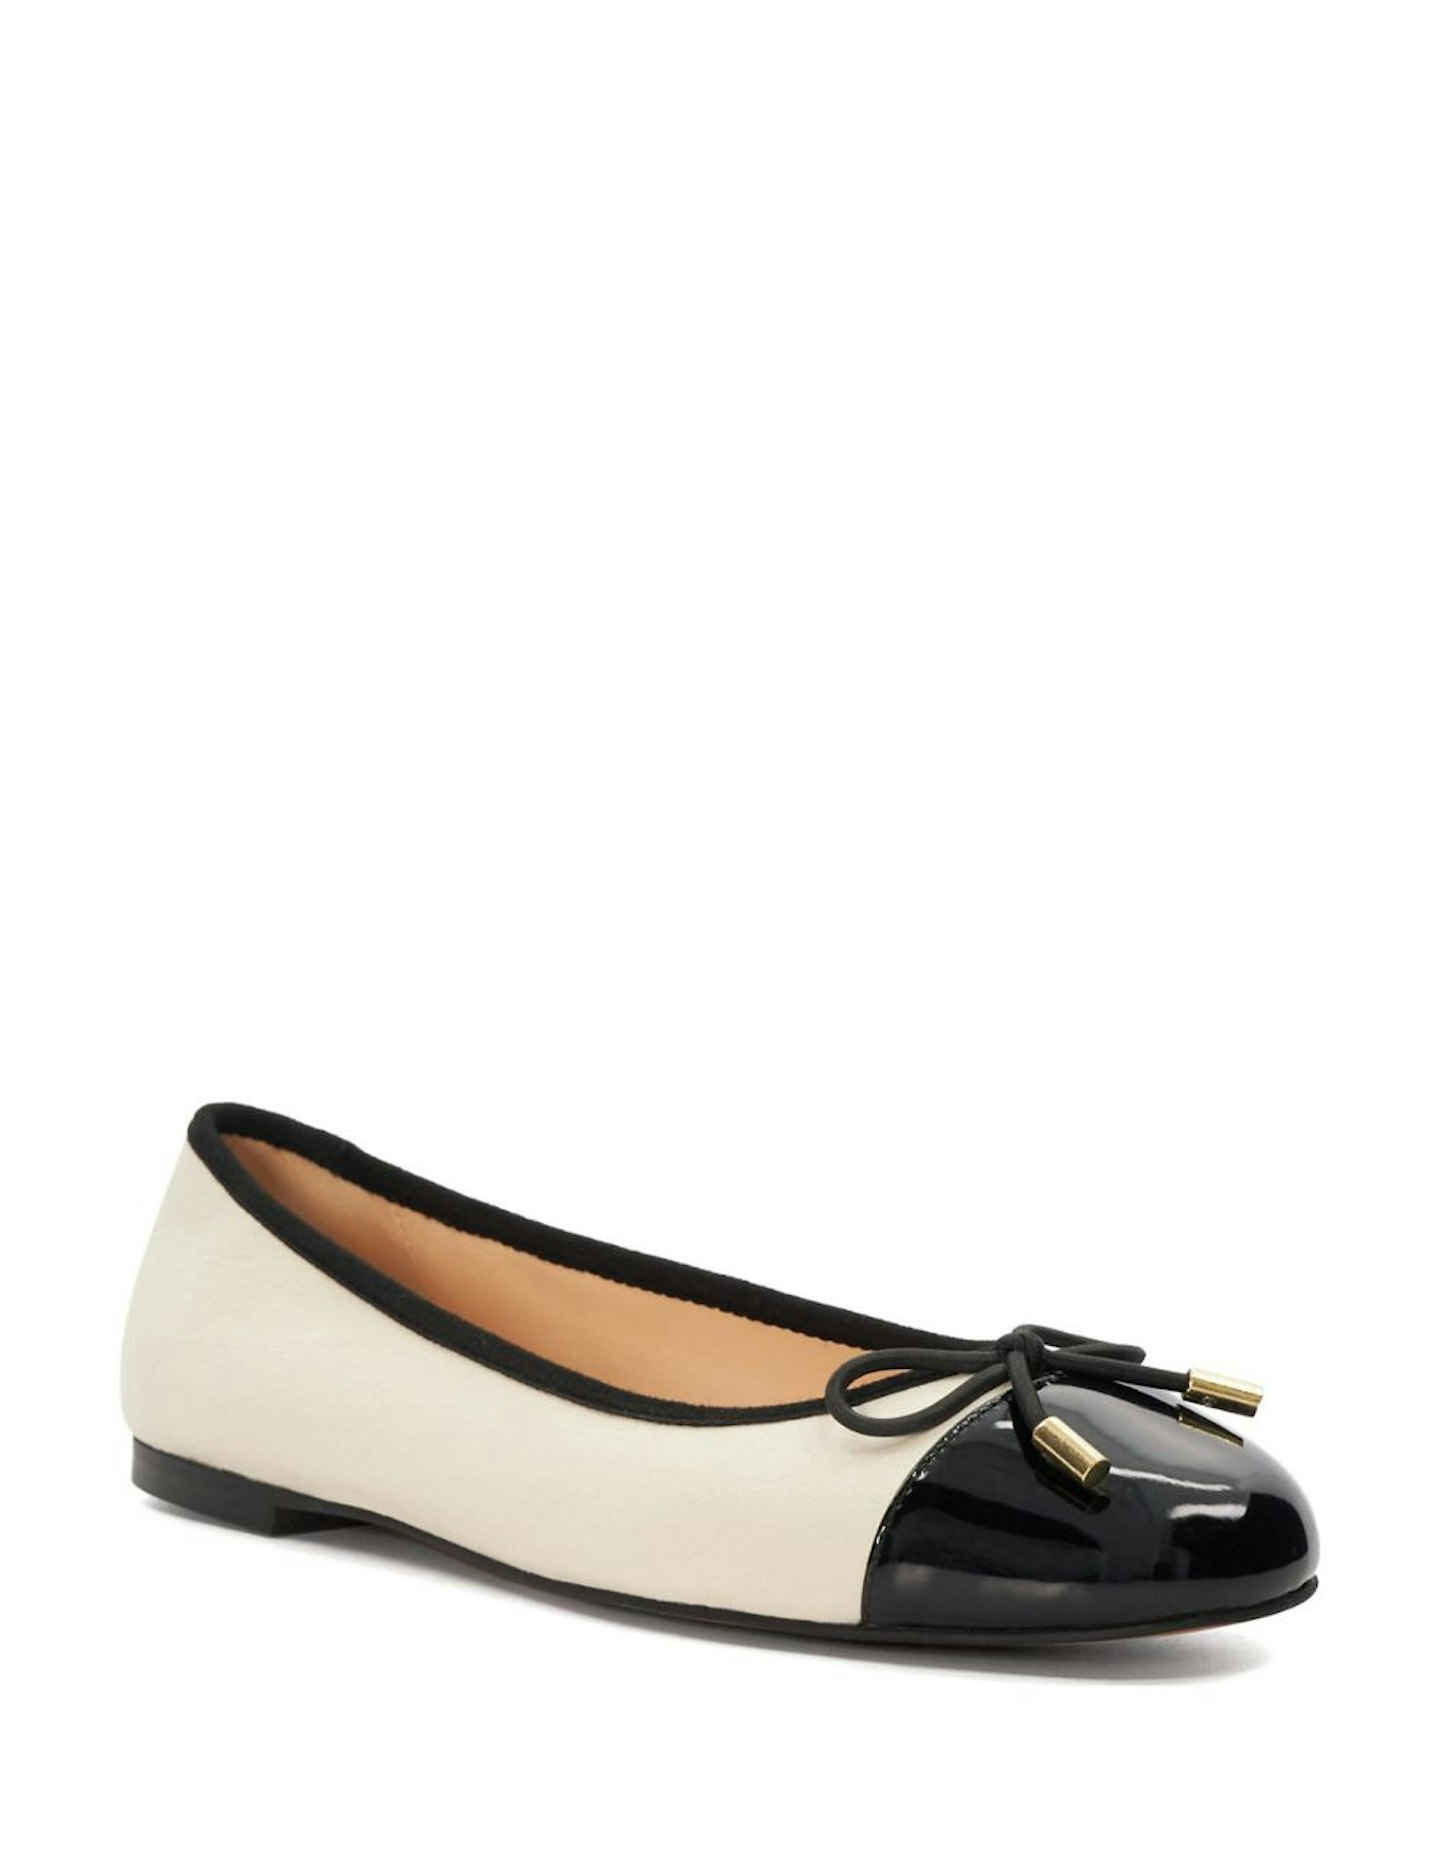 M&S, Leather Bow Slip On Flat Ballet Pumps